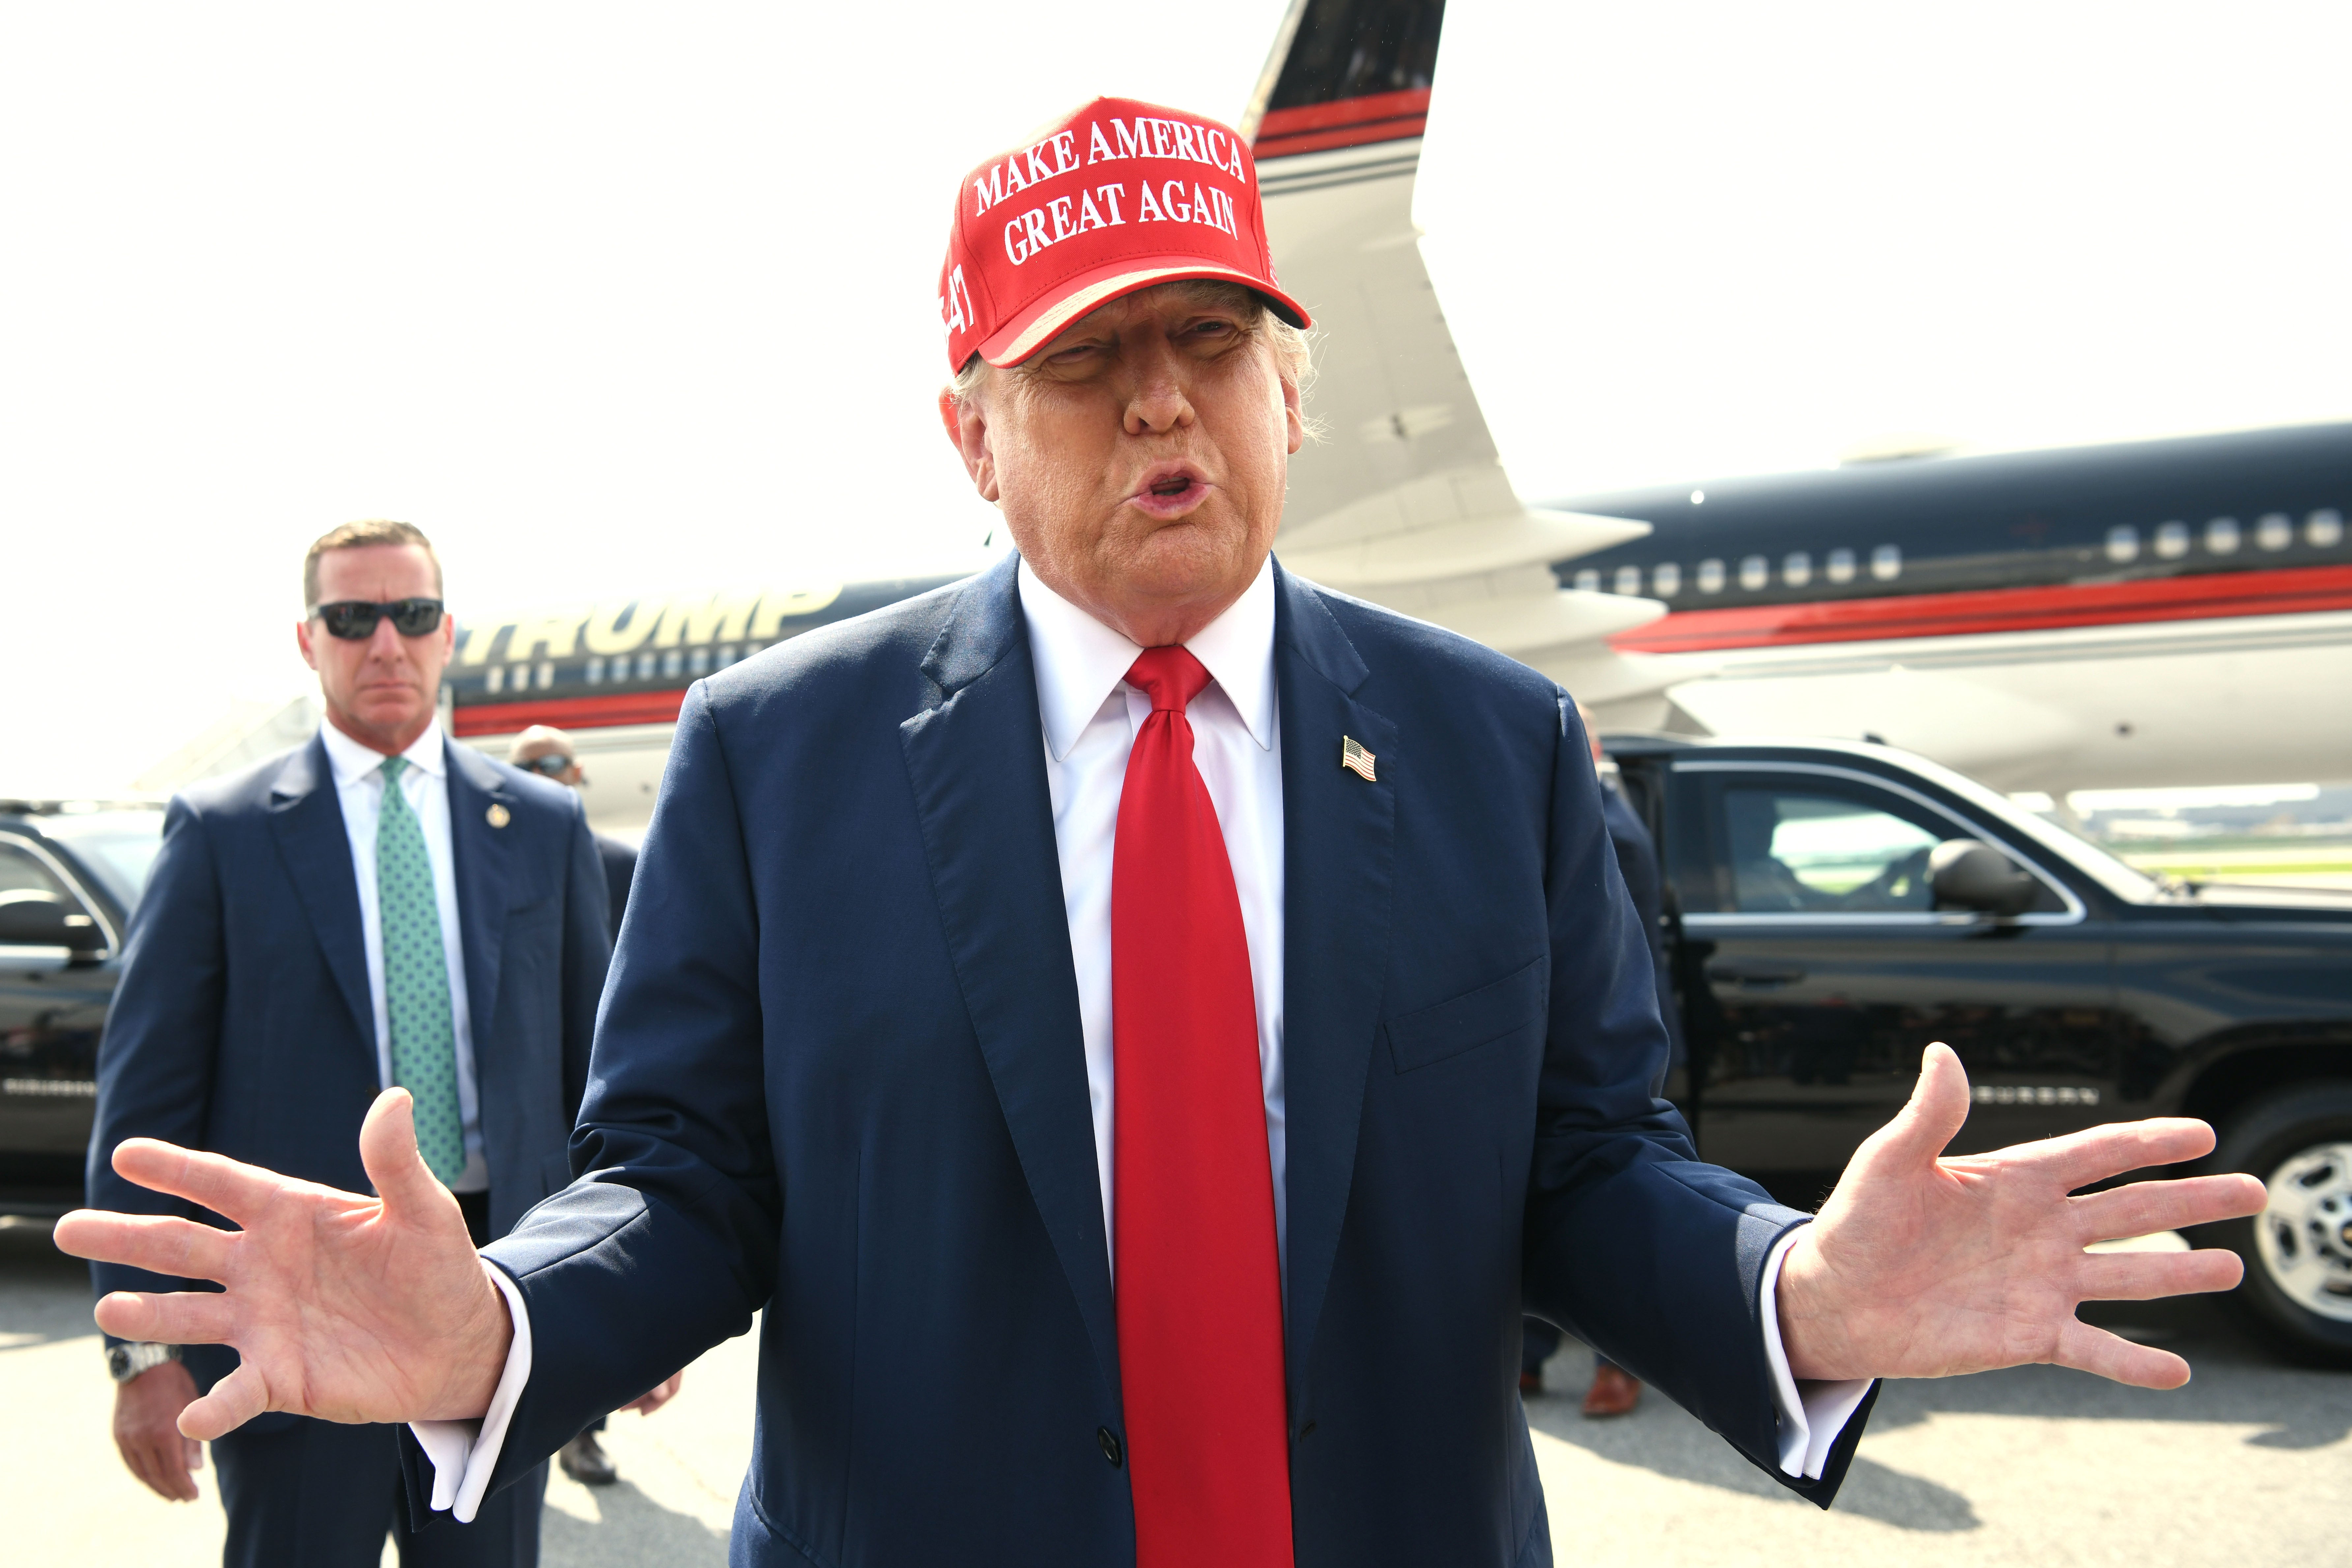 Despite his legal issues, Trump still won the GOP presidential candidacy easily